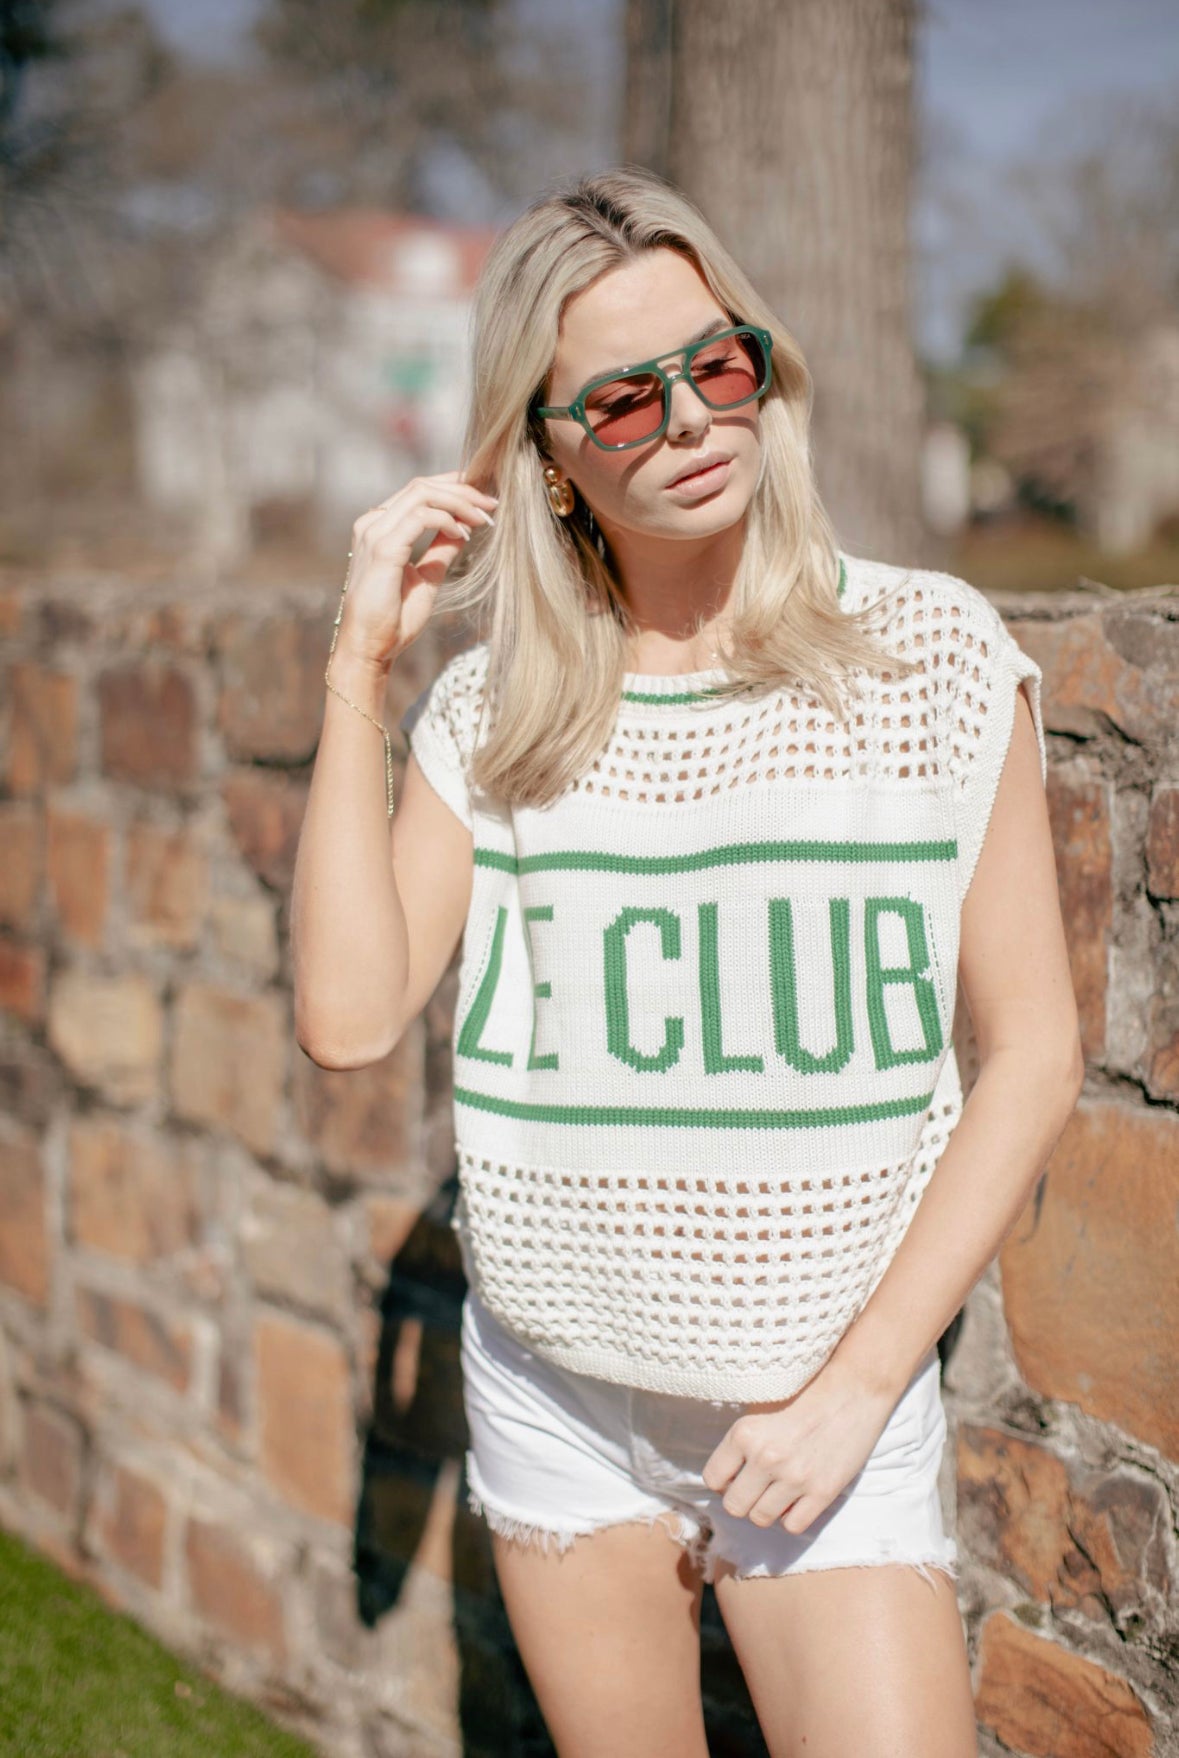 LE CLUB NETTED SWEATER VEST